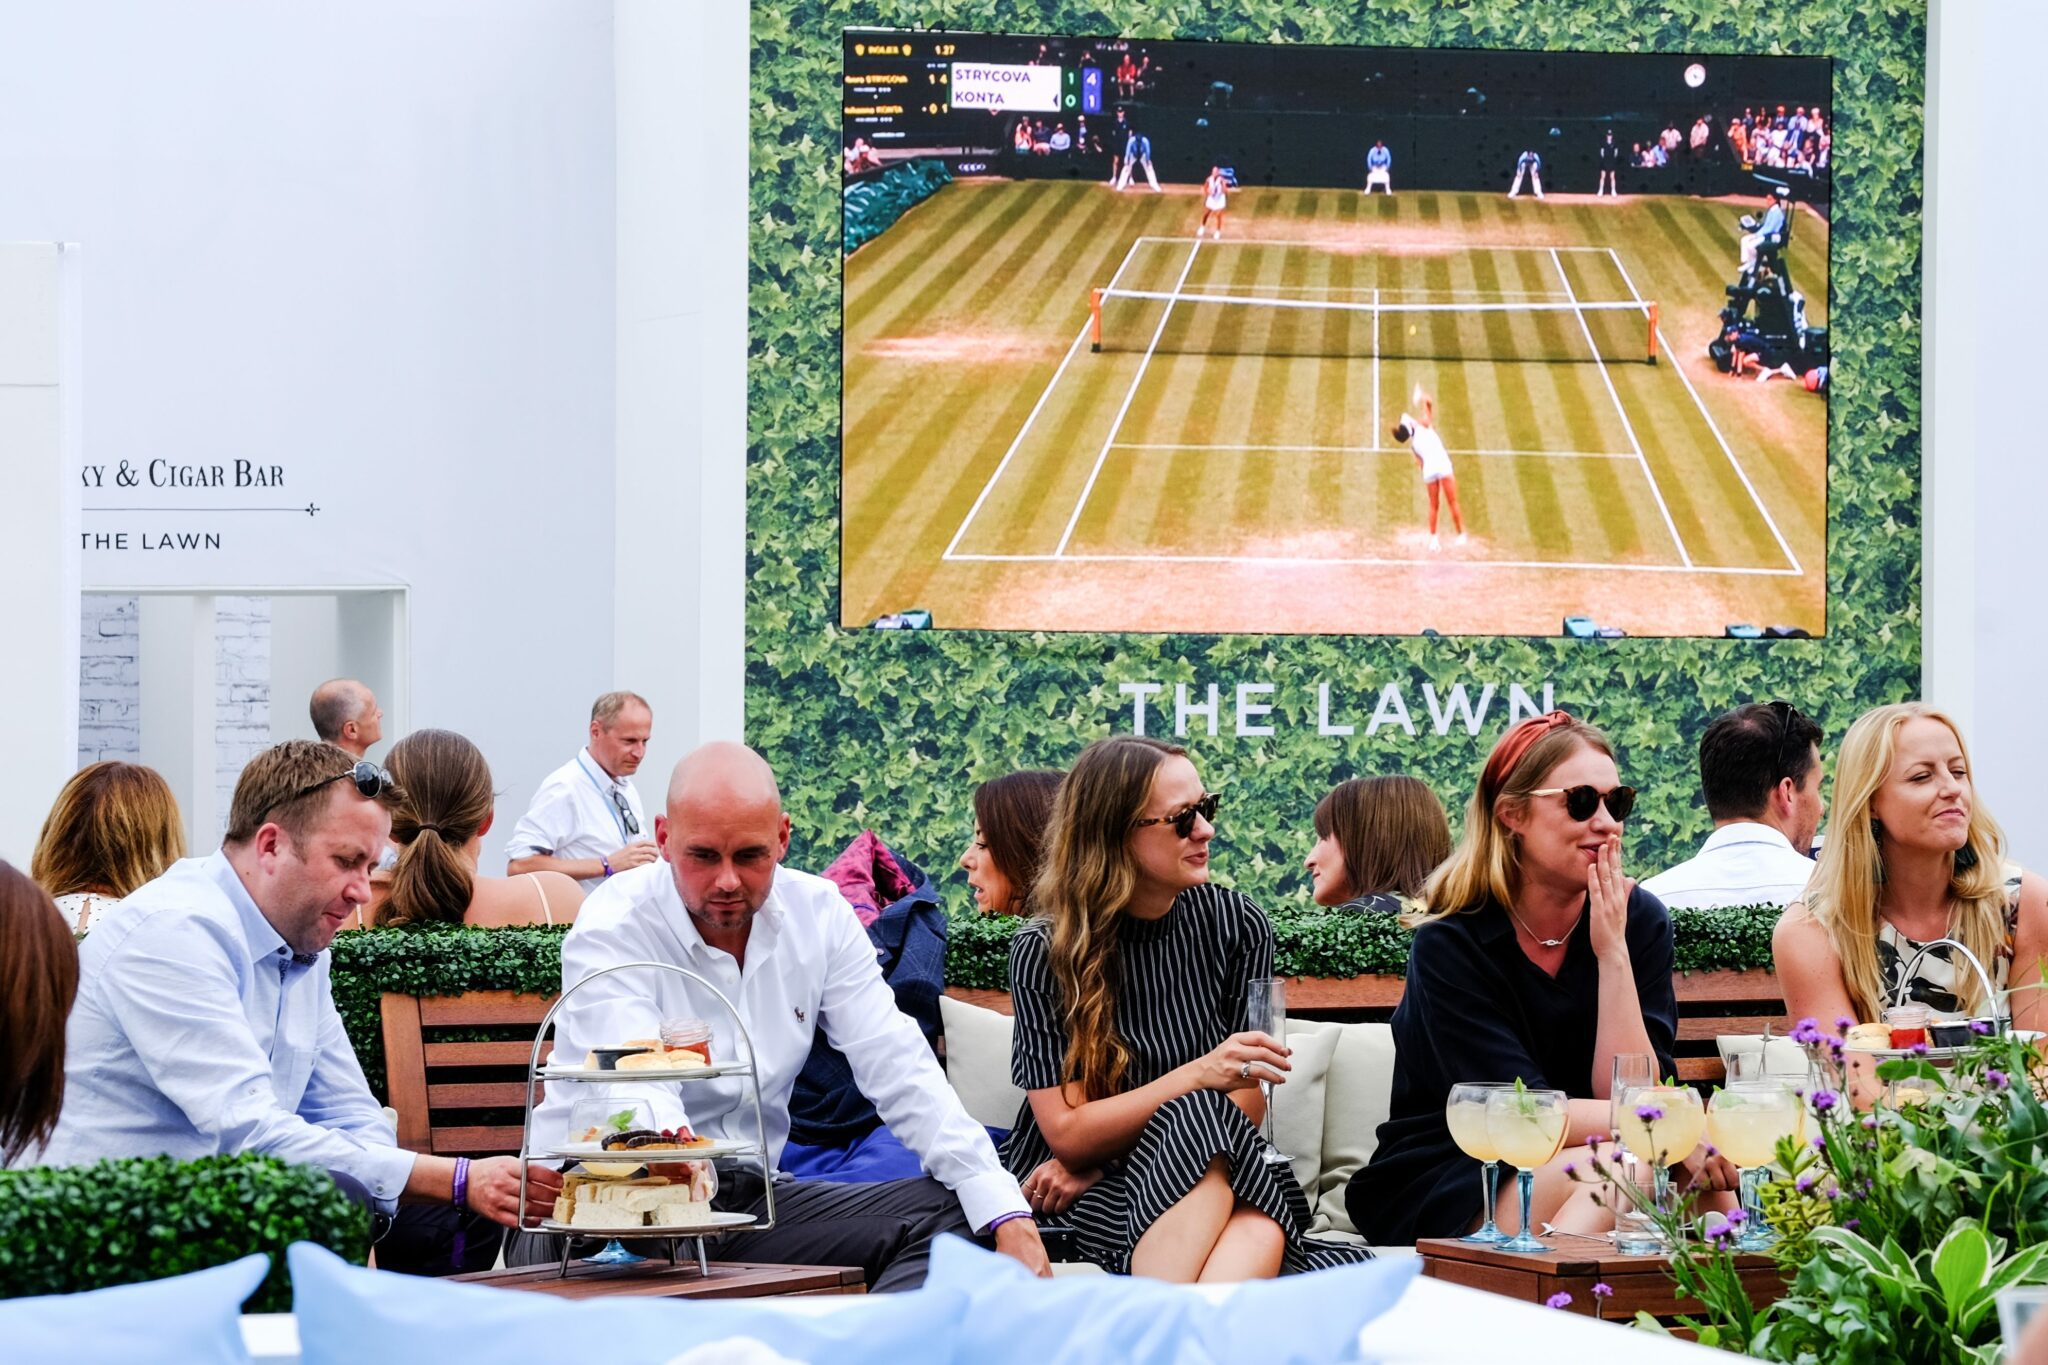 Image of The Lawn and people sat outdoors at Wimbledon